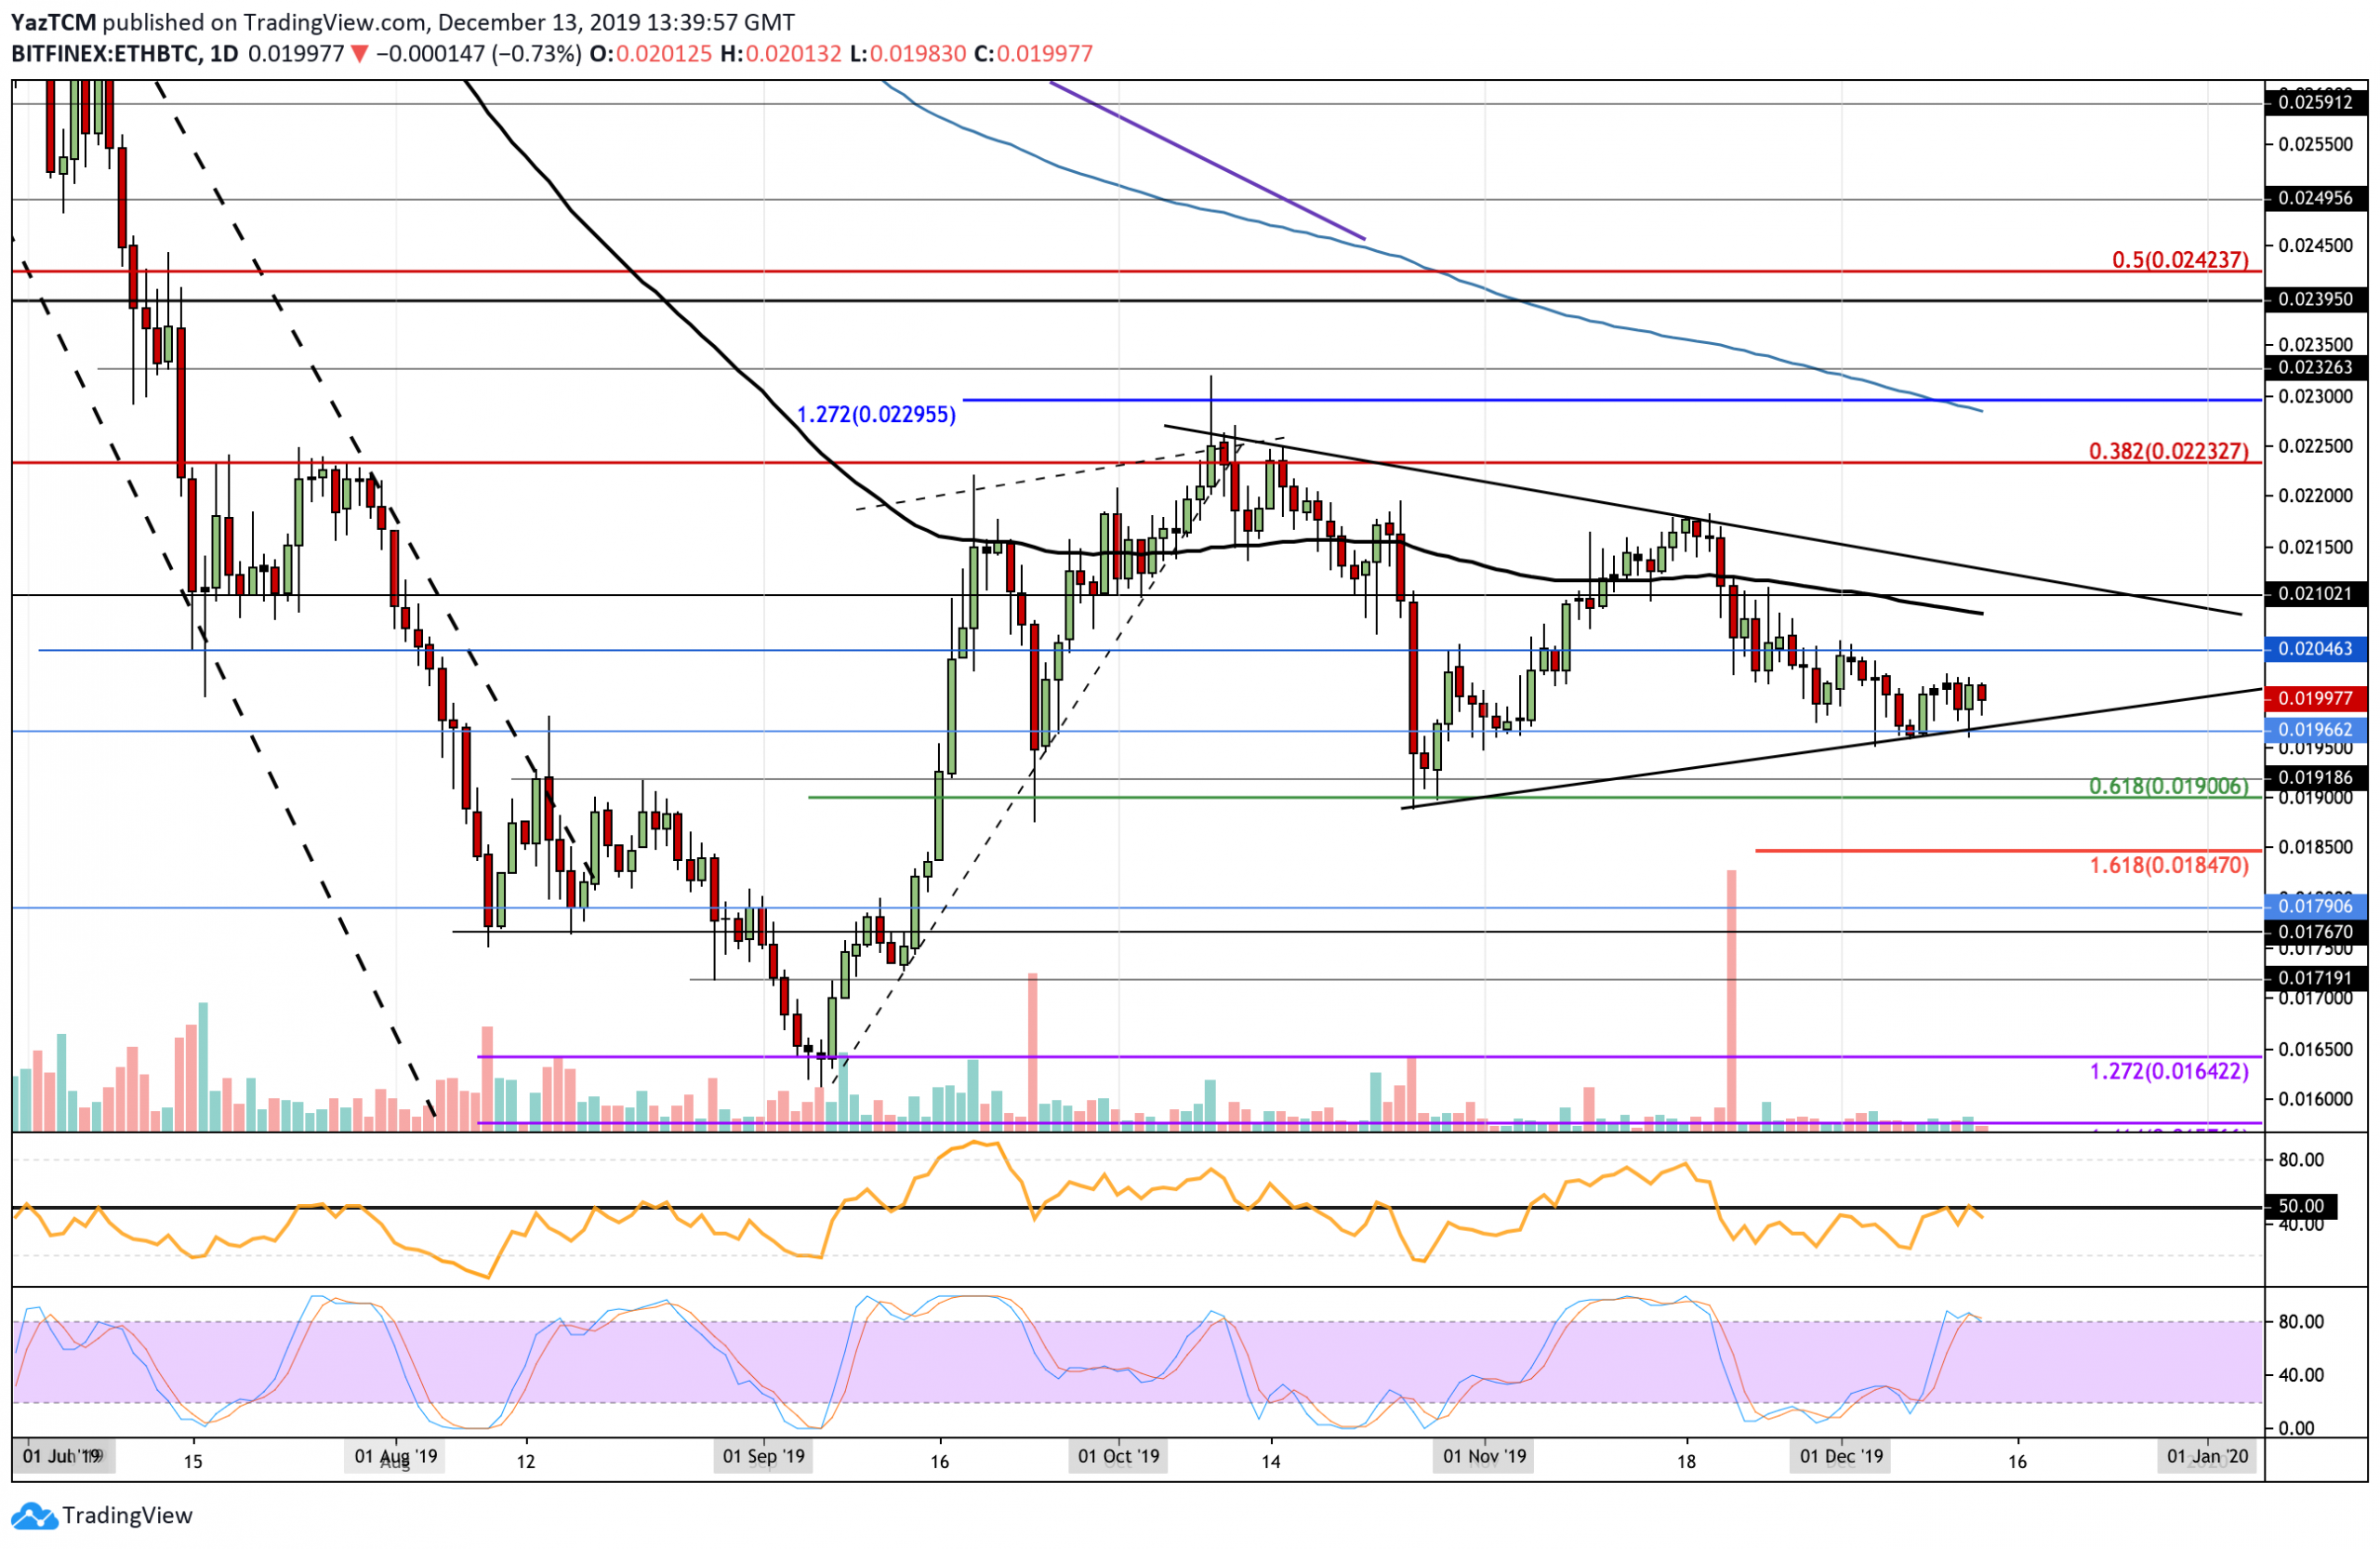 Crypto Price Analysis & Overview December 13th: Bitcoin, Ethereum, Ripple, Tezos, and Tron